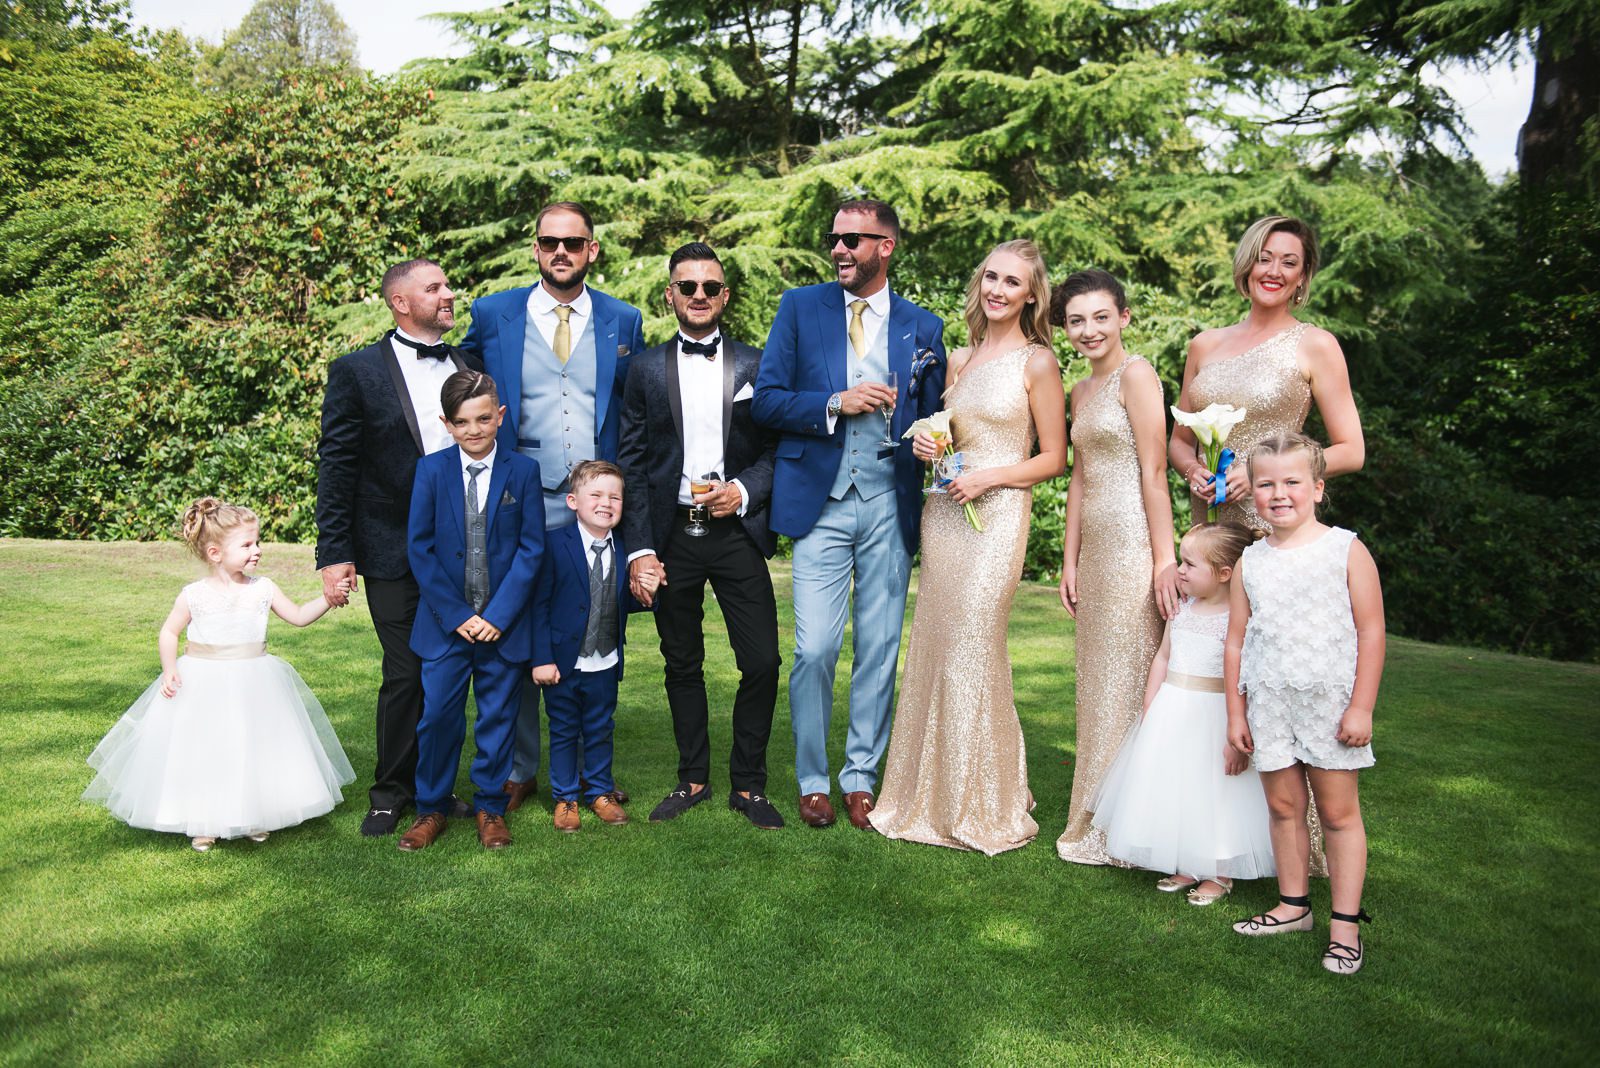 Stylish and relaxed group photo of a same sex wedding with bridesmaids and grooms men.